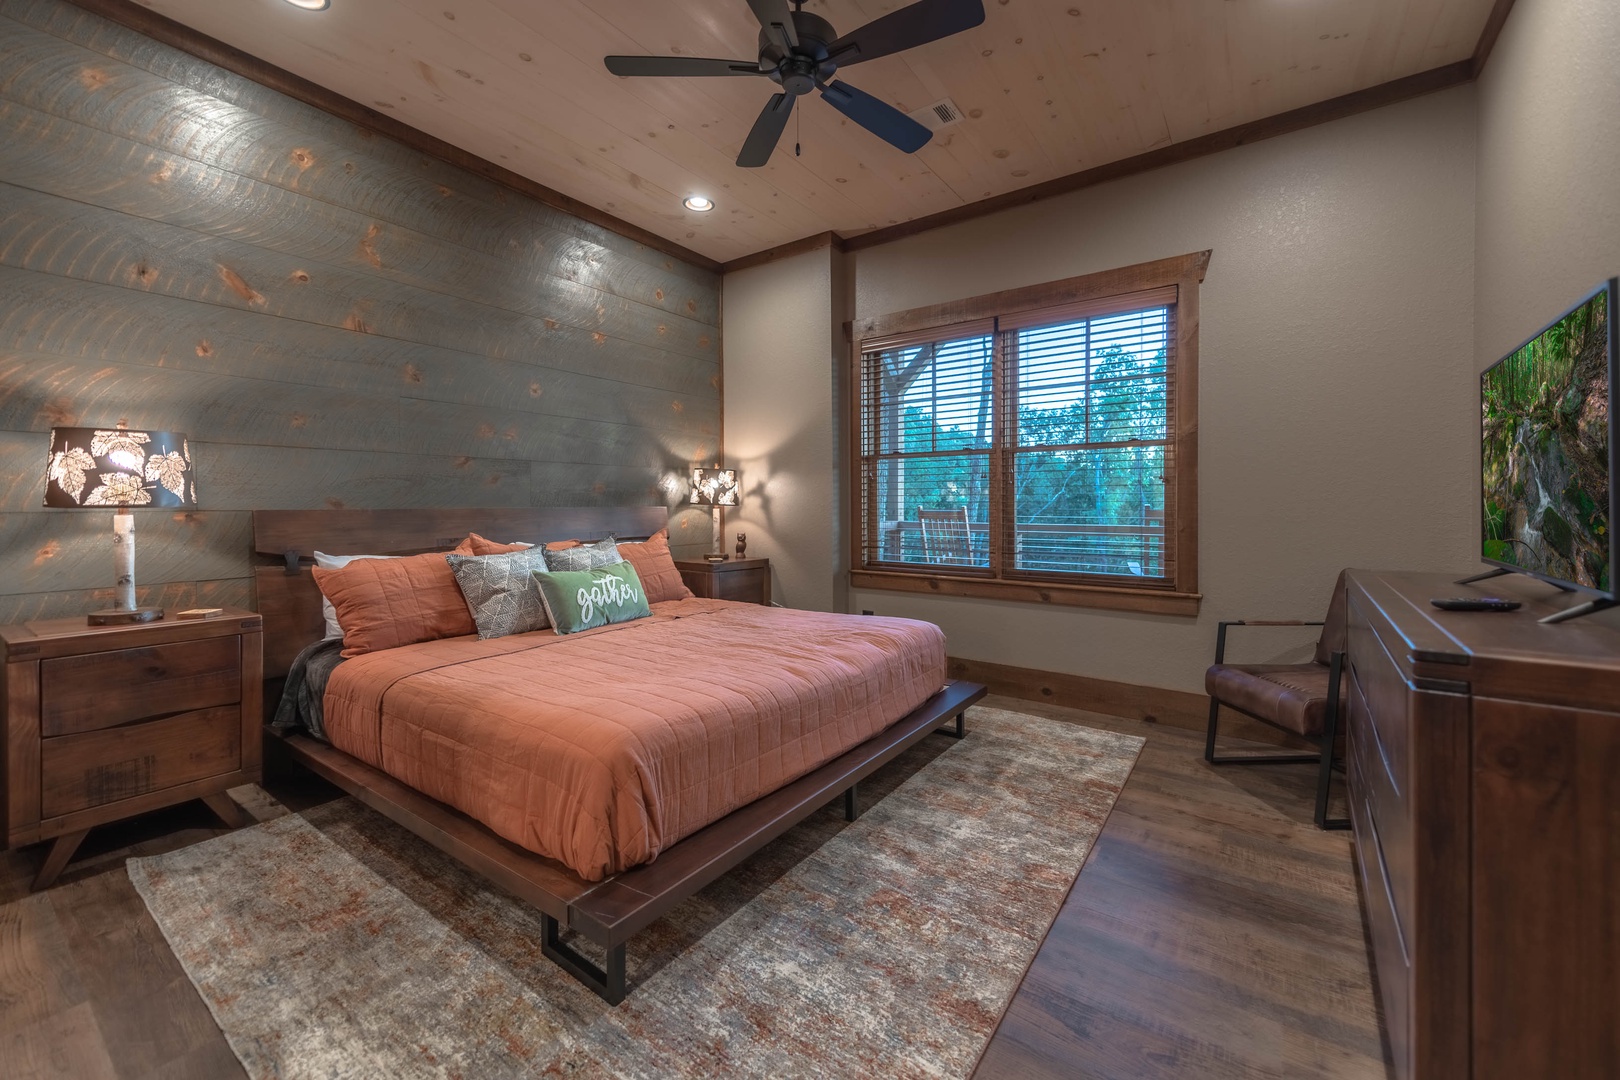 Southern Star- King bedroom suite with full furnishings